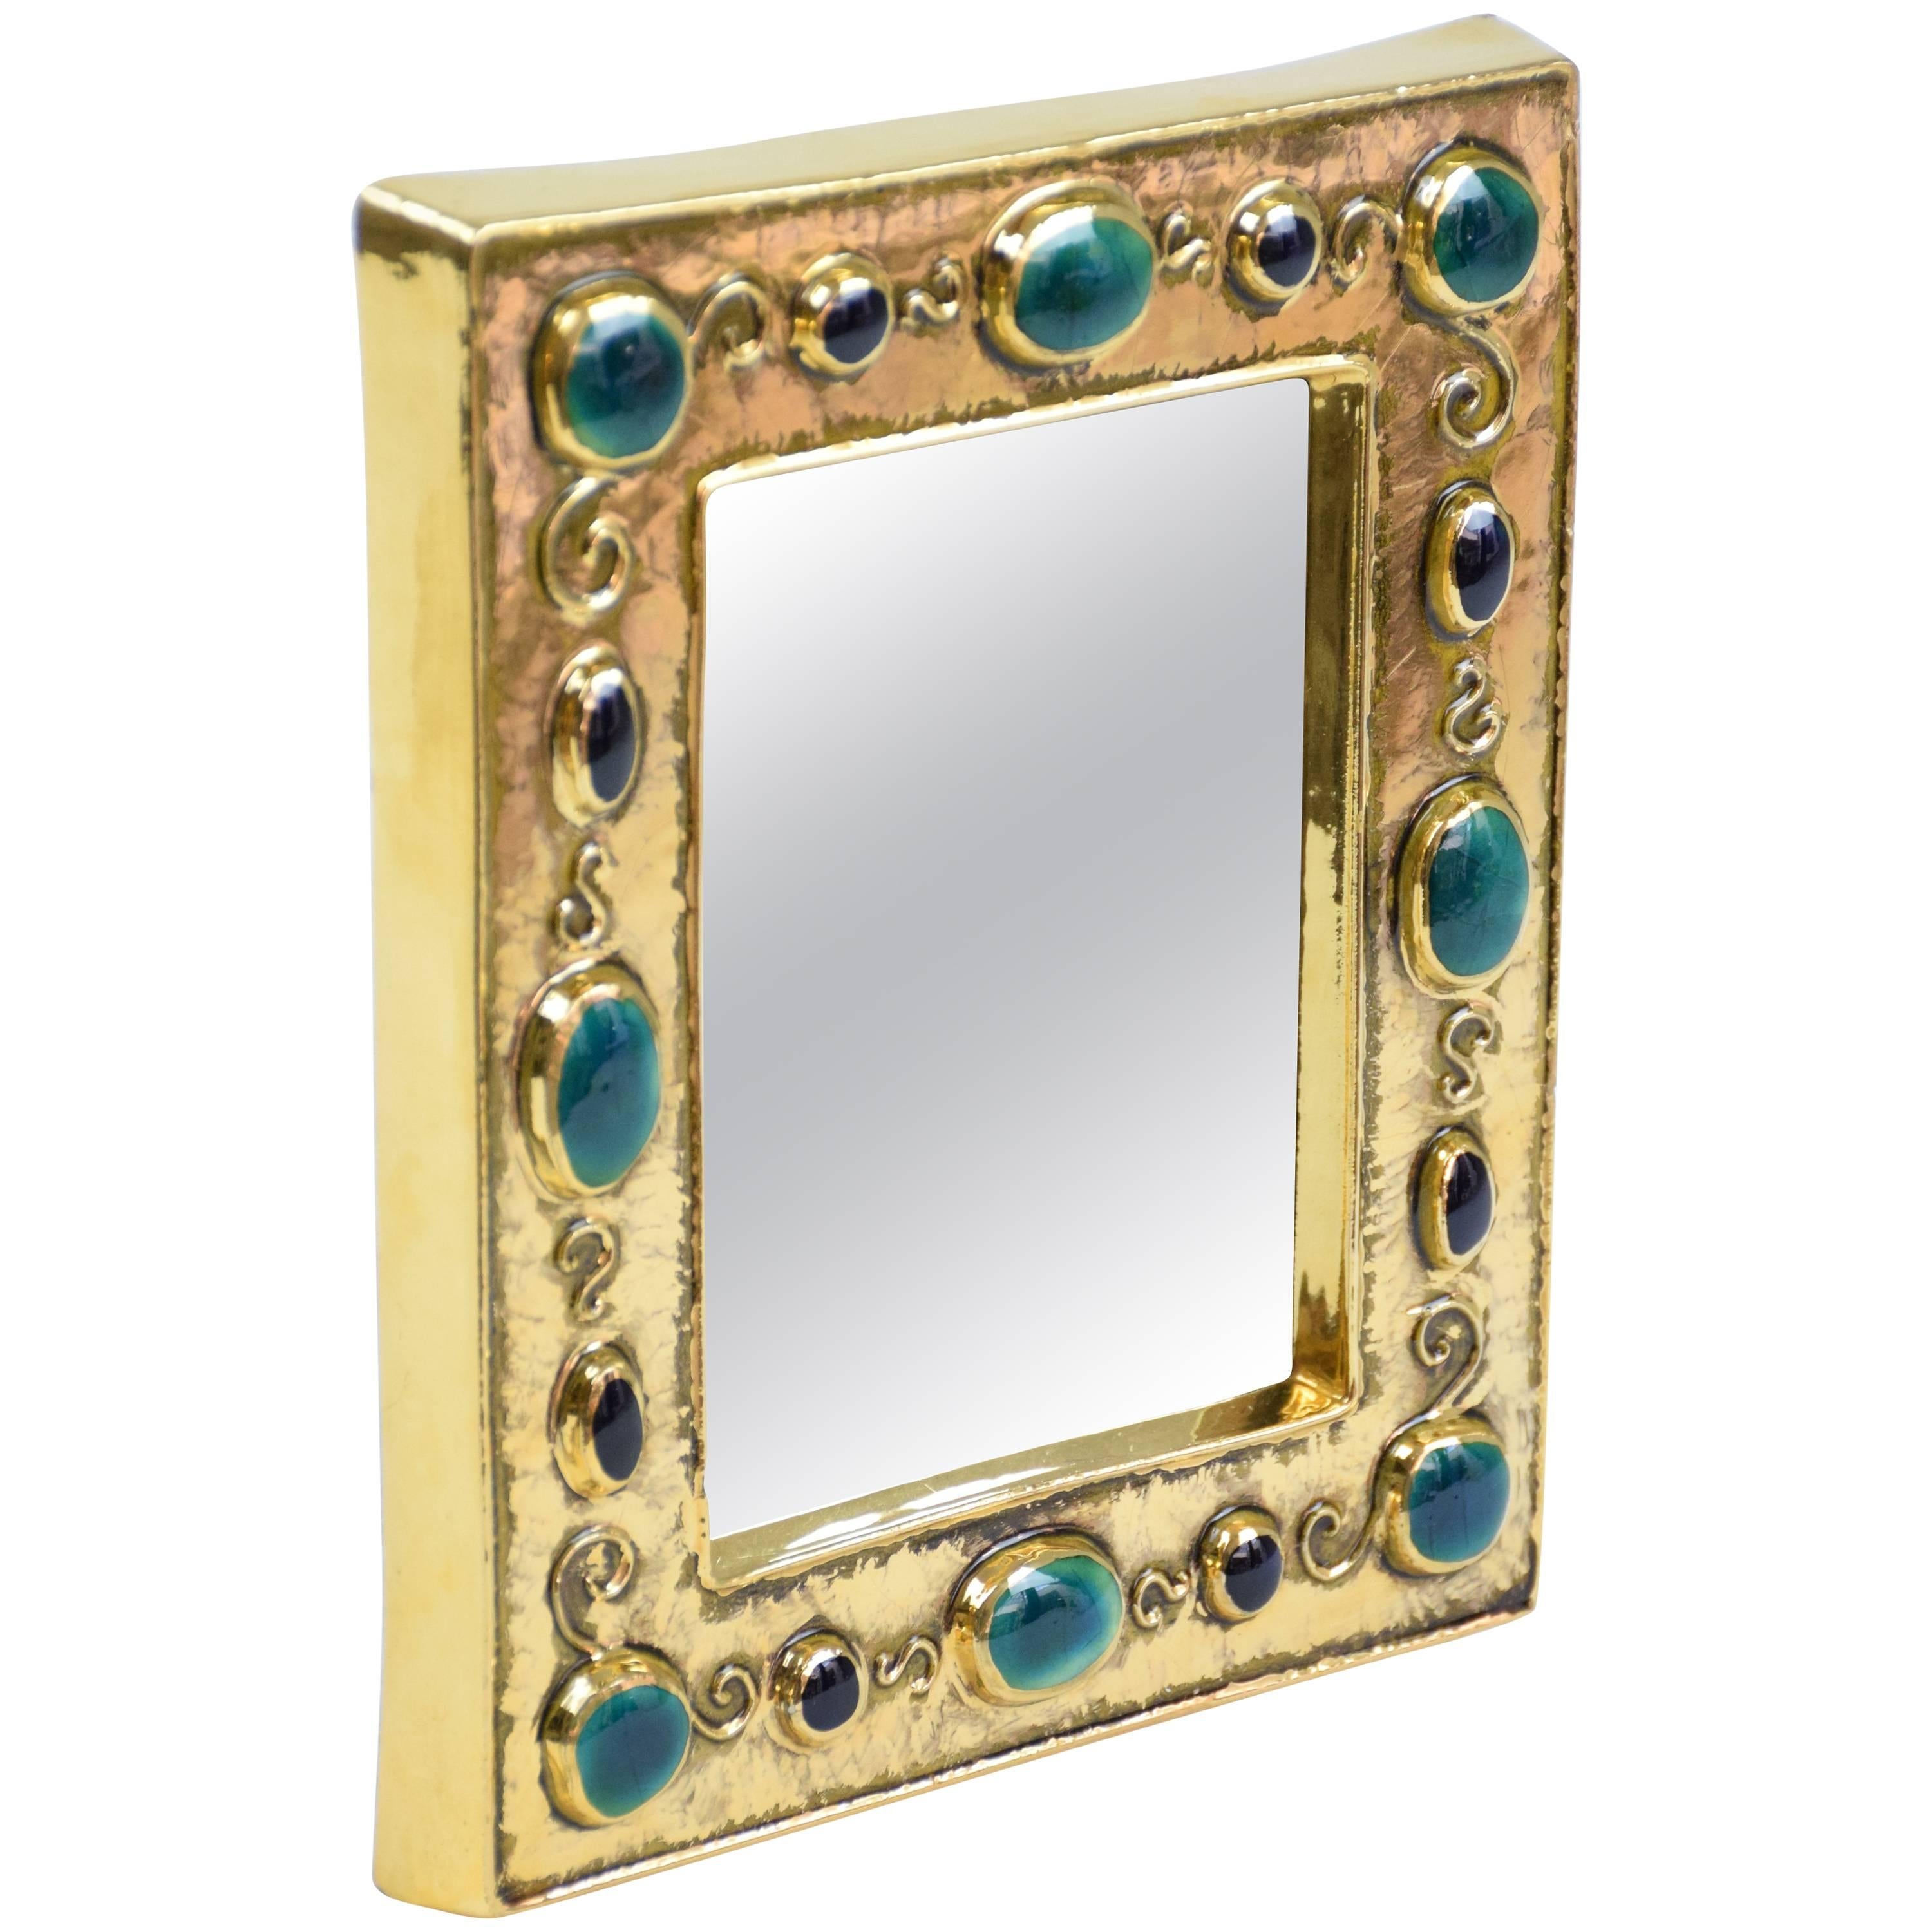 20th century vintage collectible 'Jewels Mirror' handcrafted by French artist François Lembo in the 1960s. This statement piece is crafted out of gilded and enamelled ceramic with black and green glass cabochons imitating natural